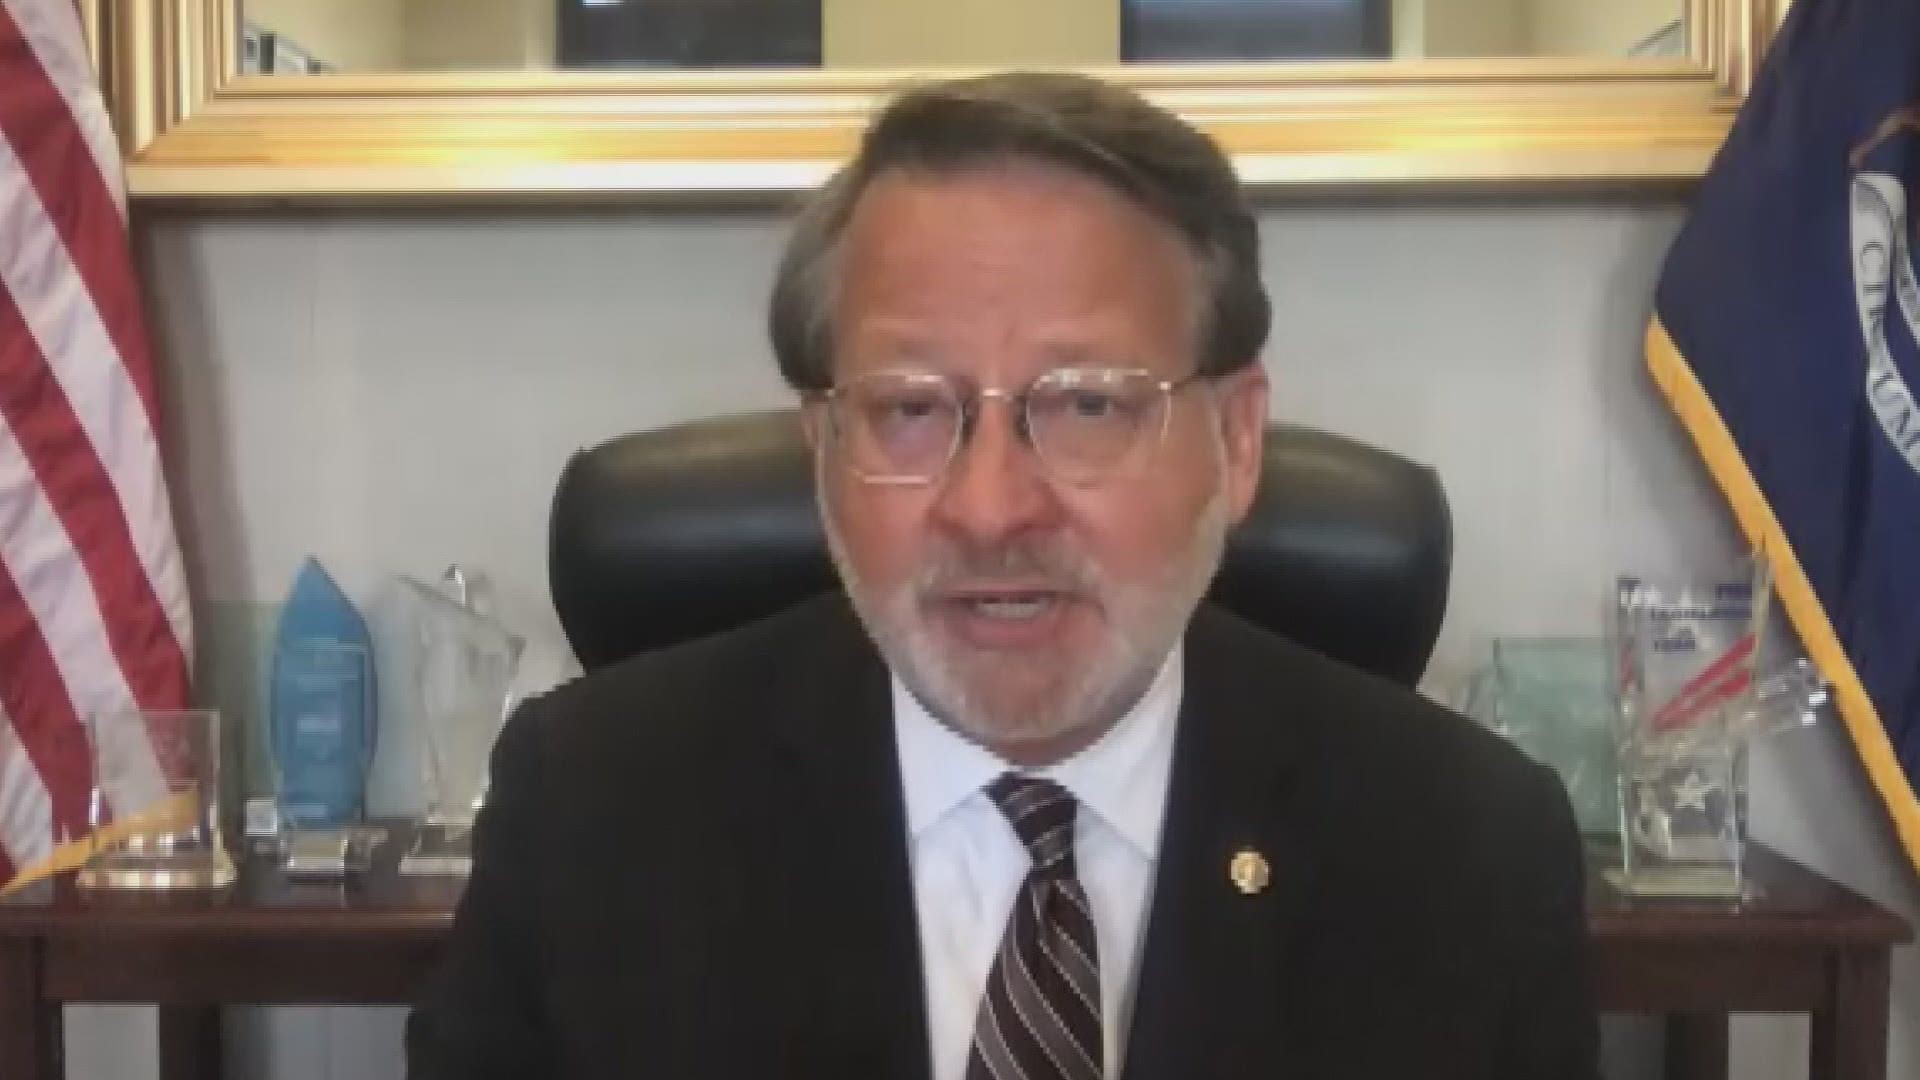 Sen. Gary Peters (D-Mich.) says he believes police departments need to be funded. But, he also says reforms are needed to address police brutality.